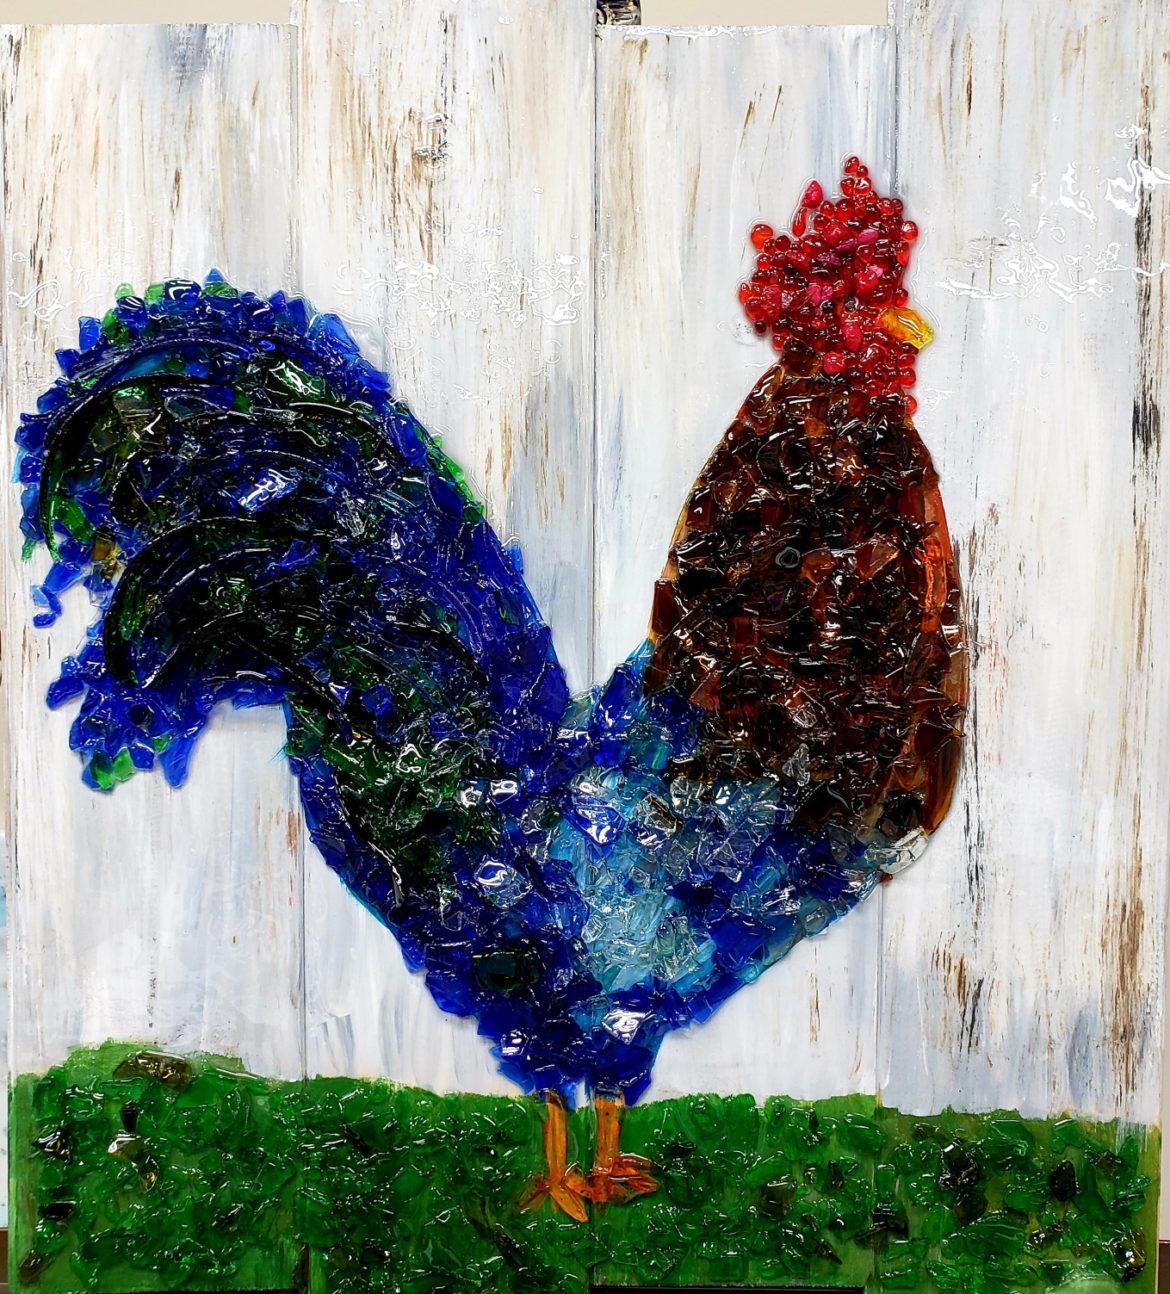 Recycled glass rooster at the Paint Shack in Eau Claire